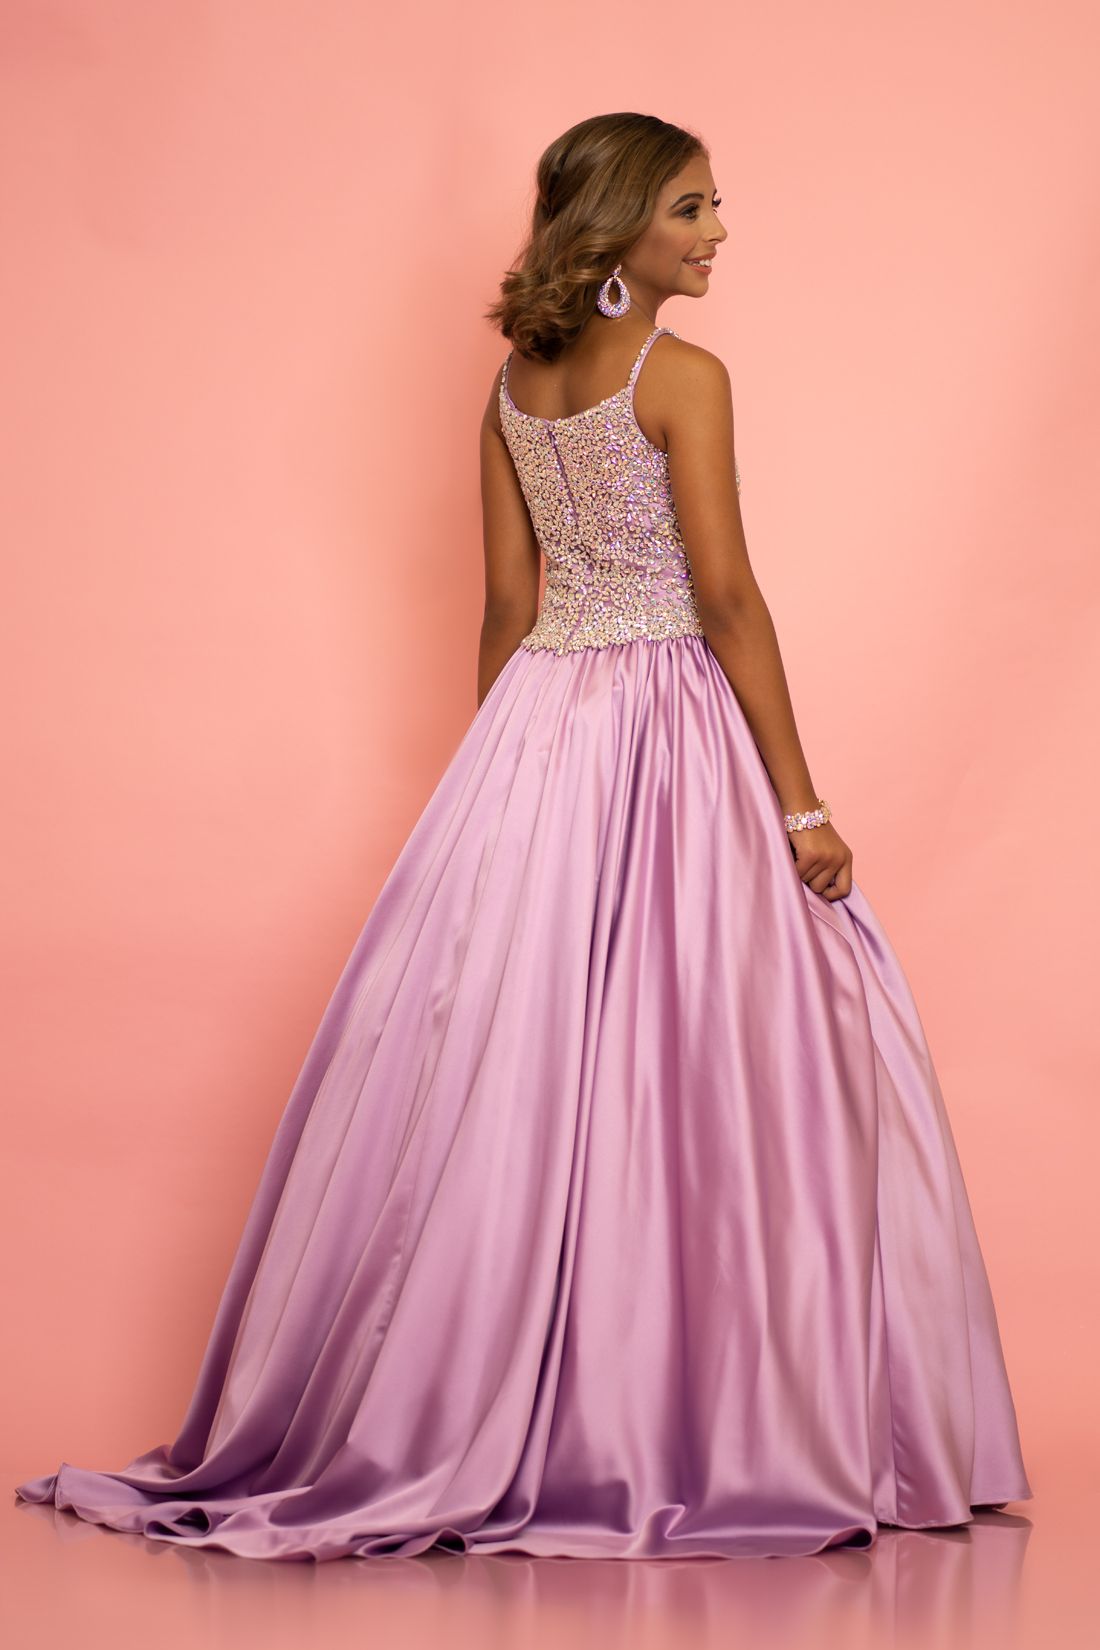 Sugar Kayne C134 by Johnathan Kayne Girls and Preteens long pageant gown with stone encrusted bodice with and embellished spaghetti straps.  The full ballgown skirt is made of Duchess Satin and has a sweeping train.  Available colors:  Hot Coral, Orchid, White  Available sizes:  2, 4, 6, 8, 10, 12, 14, 16 